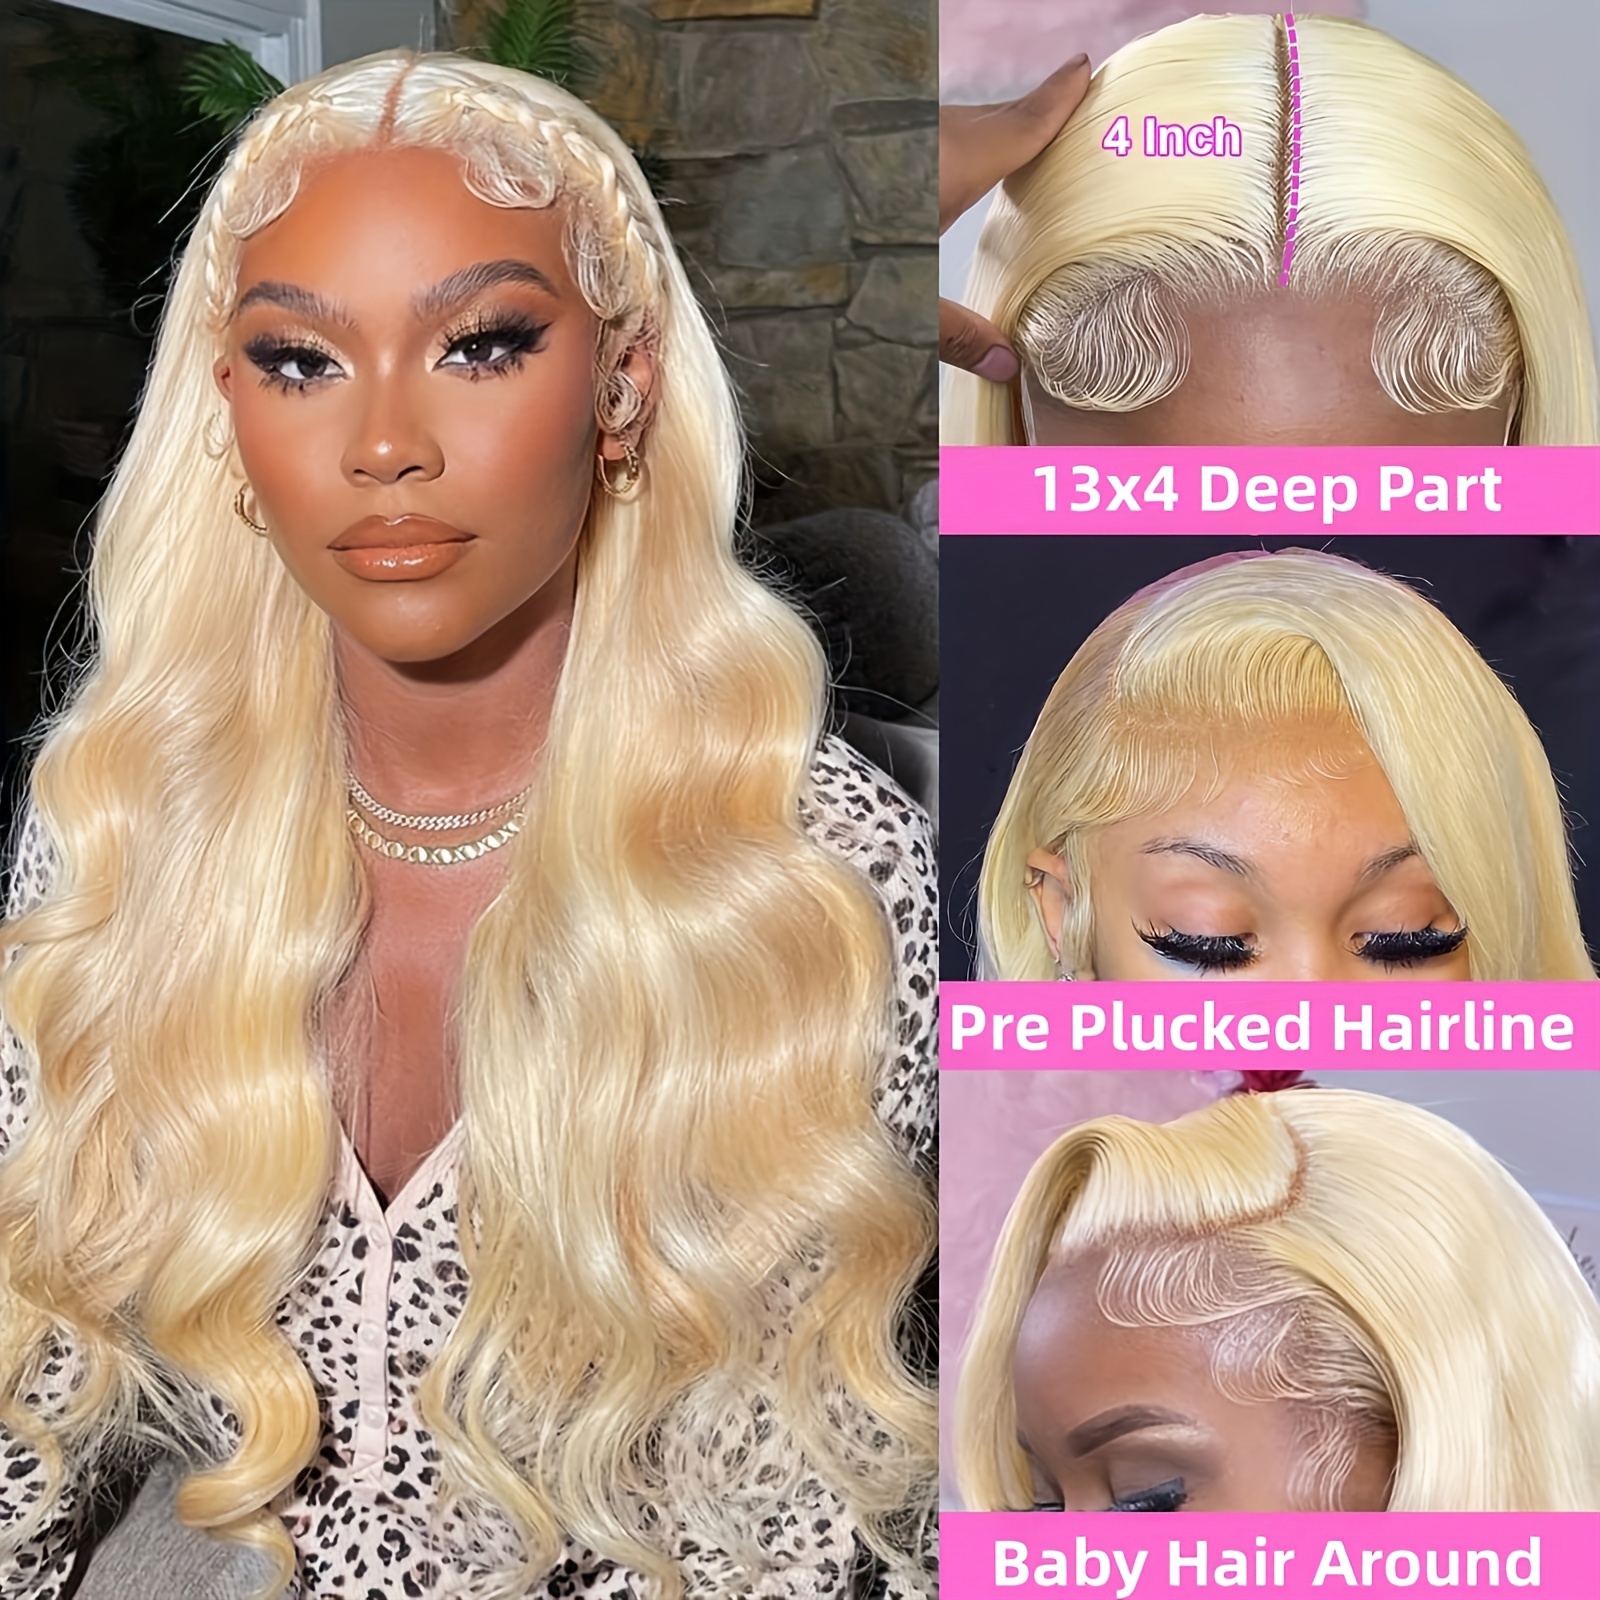 613 Lace Front Wig Human Hair 28inch 13x6 Transparent Body Wave Blonde Lace  Front Wigs Human Hair 180% Density Guleless Wigs Human Hair Pre Plucked HD